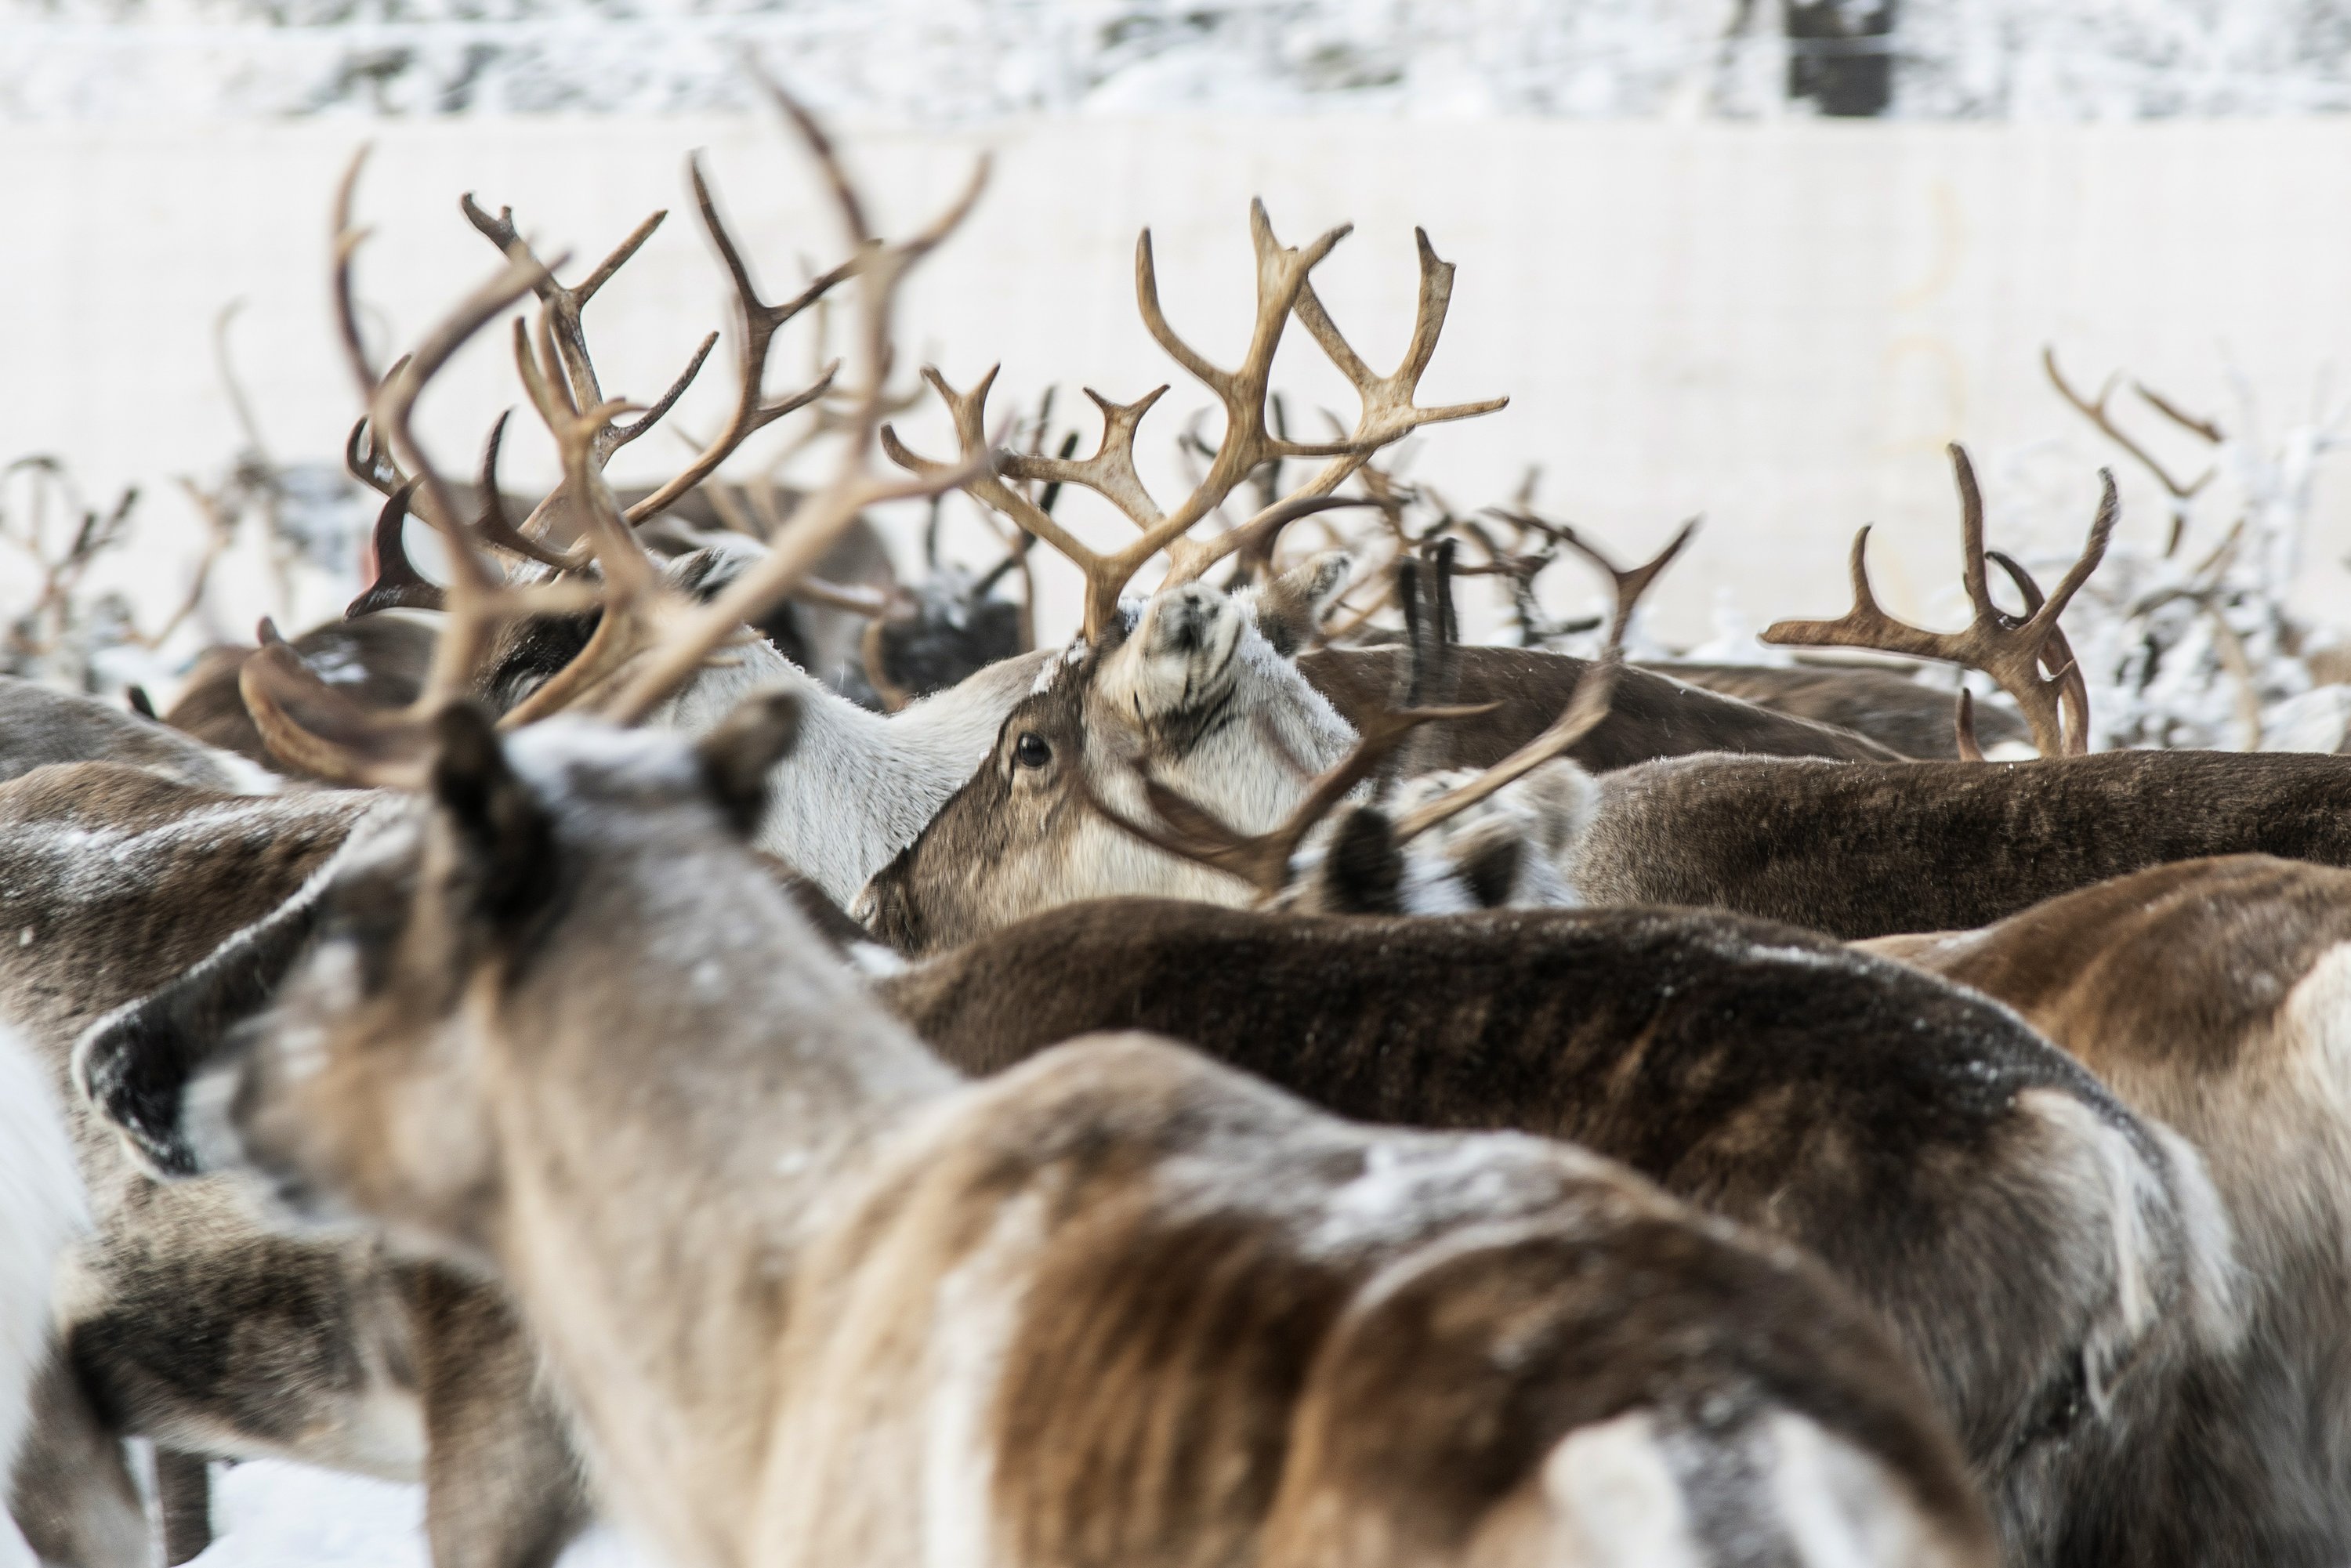 In Sweden's Arctic, ice atop snow leaves reindeer starving - The Associated Press